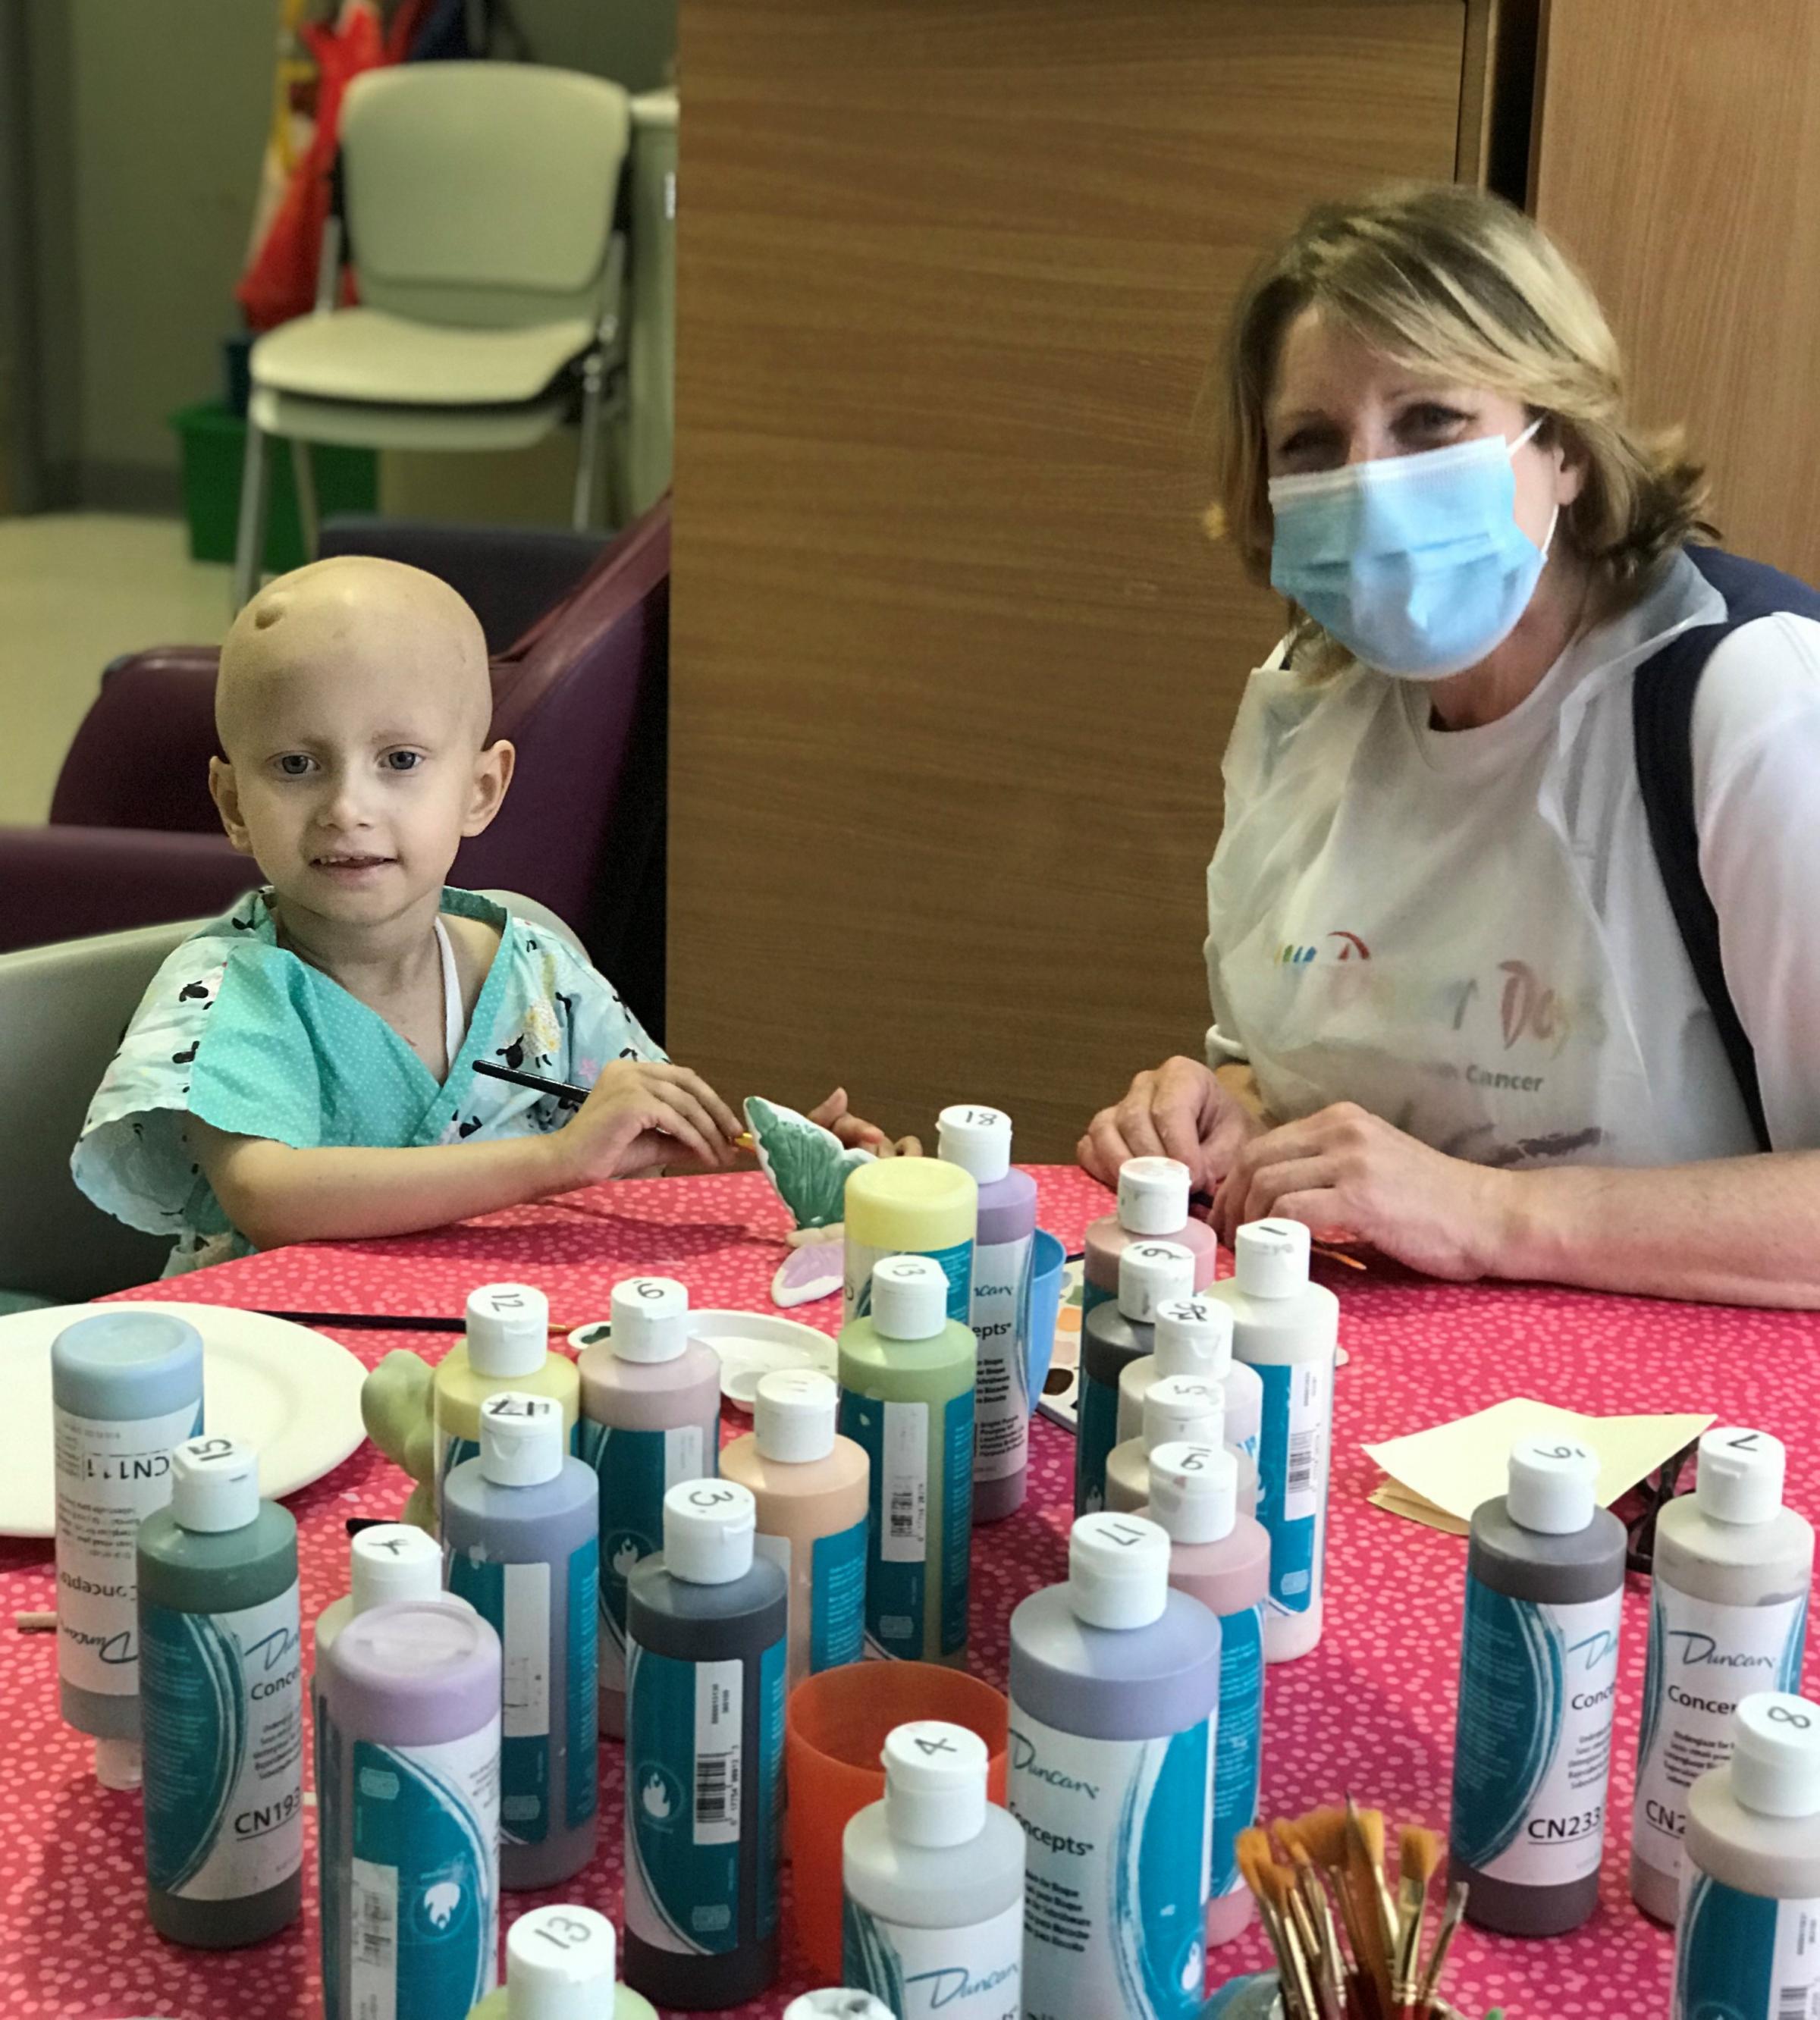 Lana Nixon has enjoyed pottery classes and story sessions provided by the charity Henry Dancer Days whilst undergoing treatment for a cancerous brain tumour 